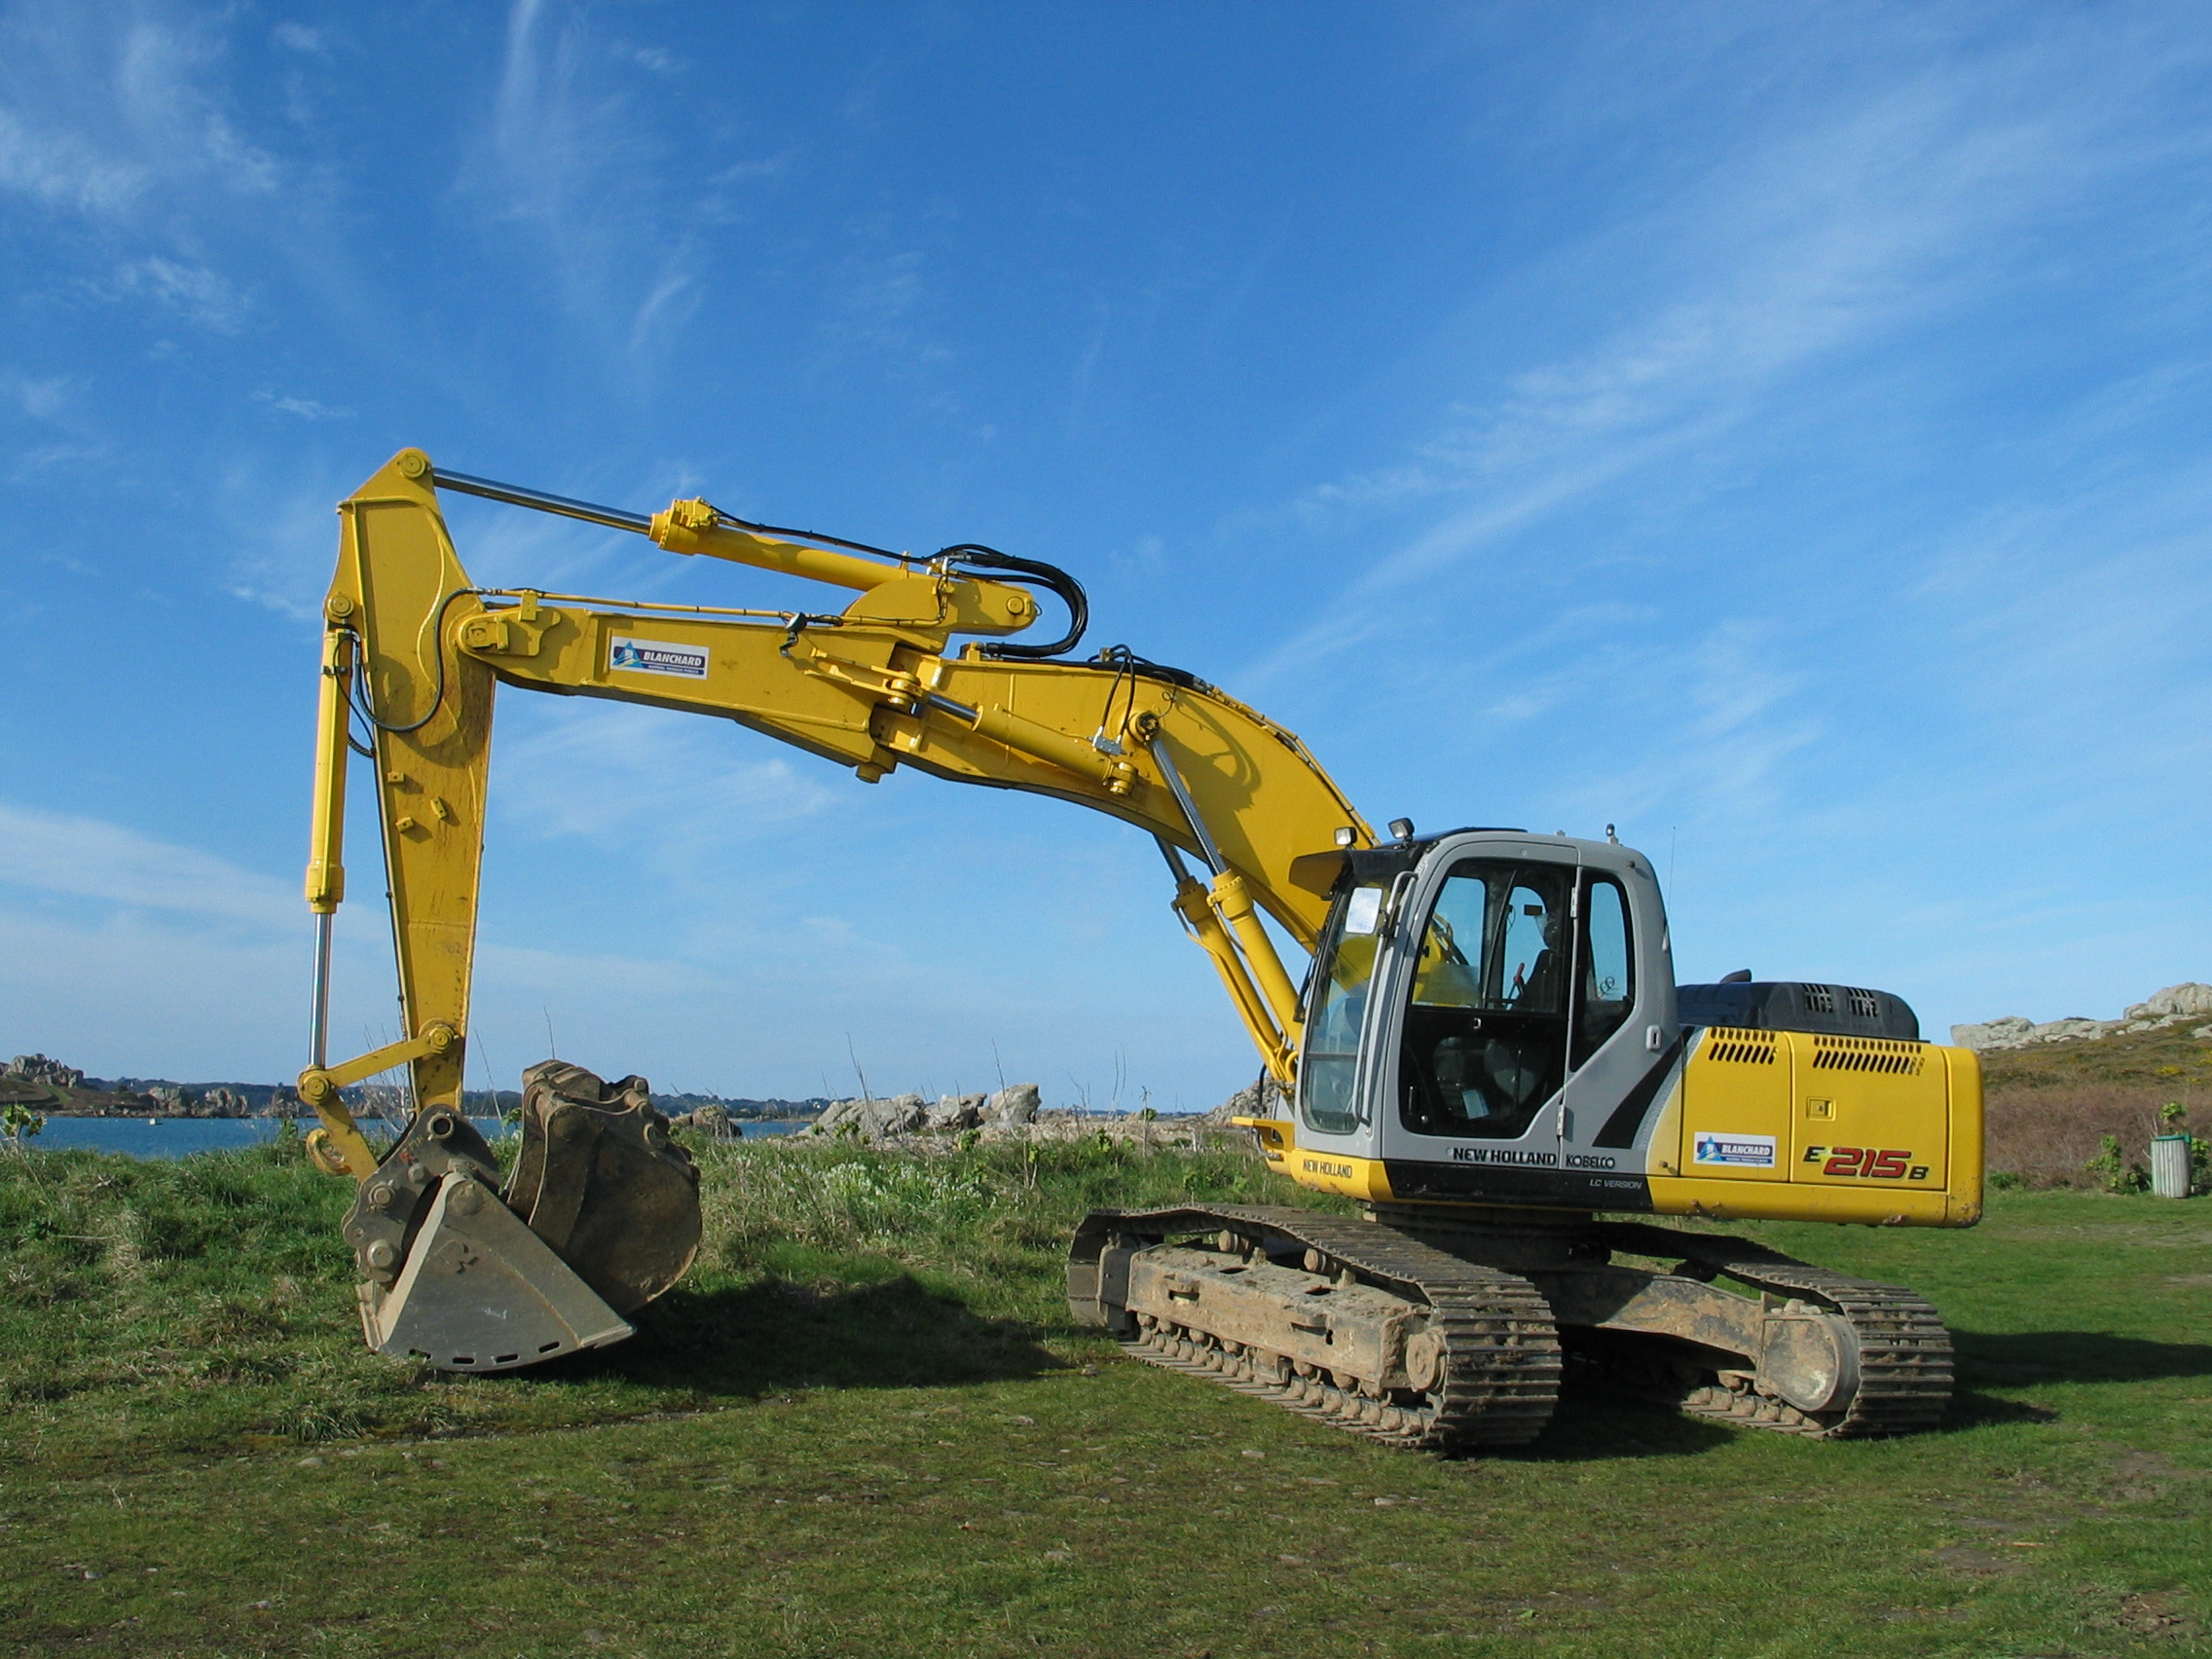 http://upload.wikimedia.org/wikipedia/commons/0/0b/Excavator_in_Brittany_France.JPG